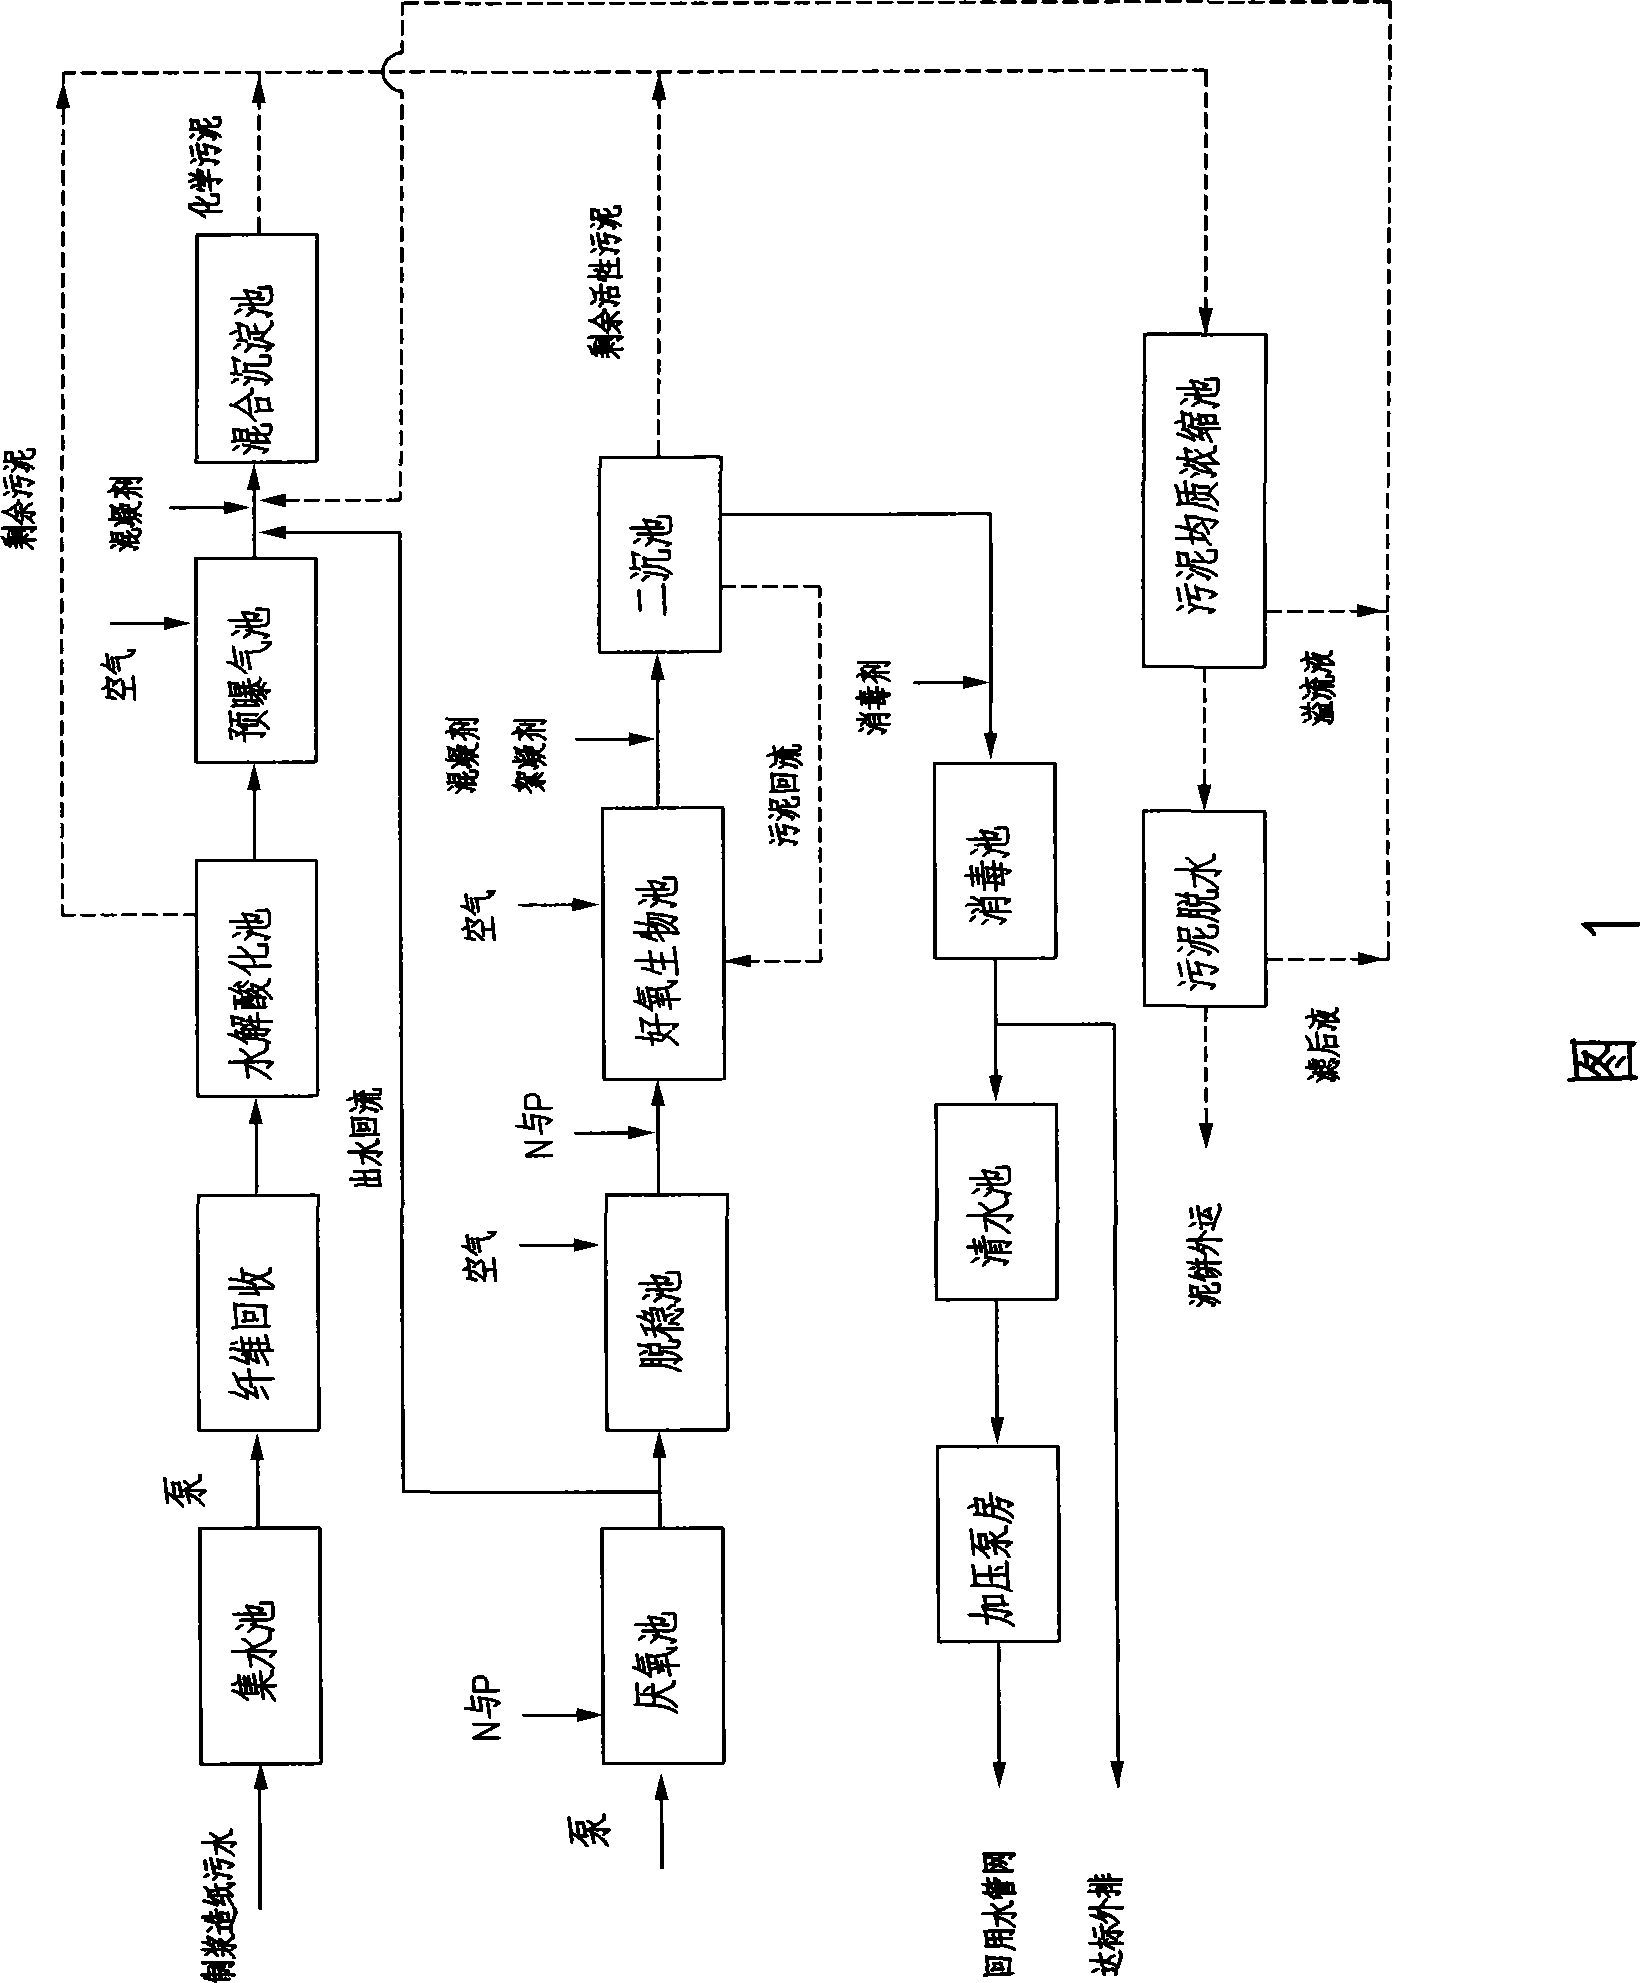 Process and apparatus for treating wastewater from pulping papermaking